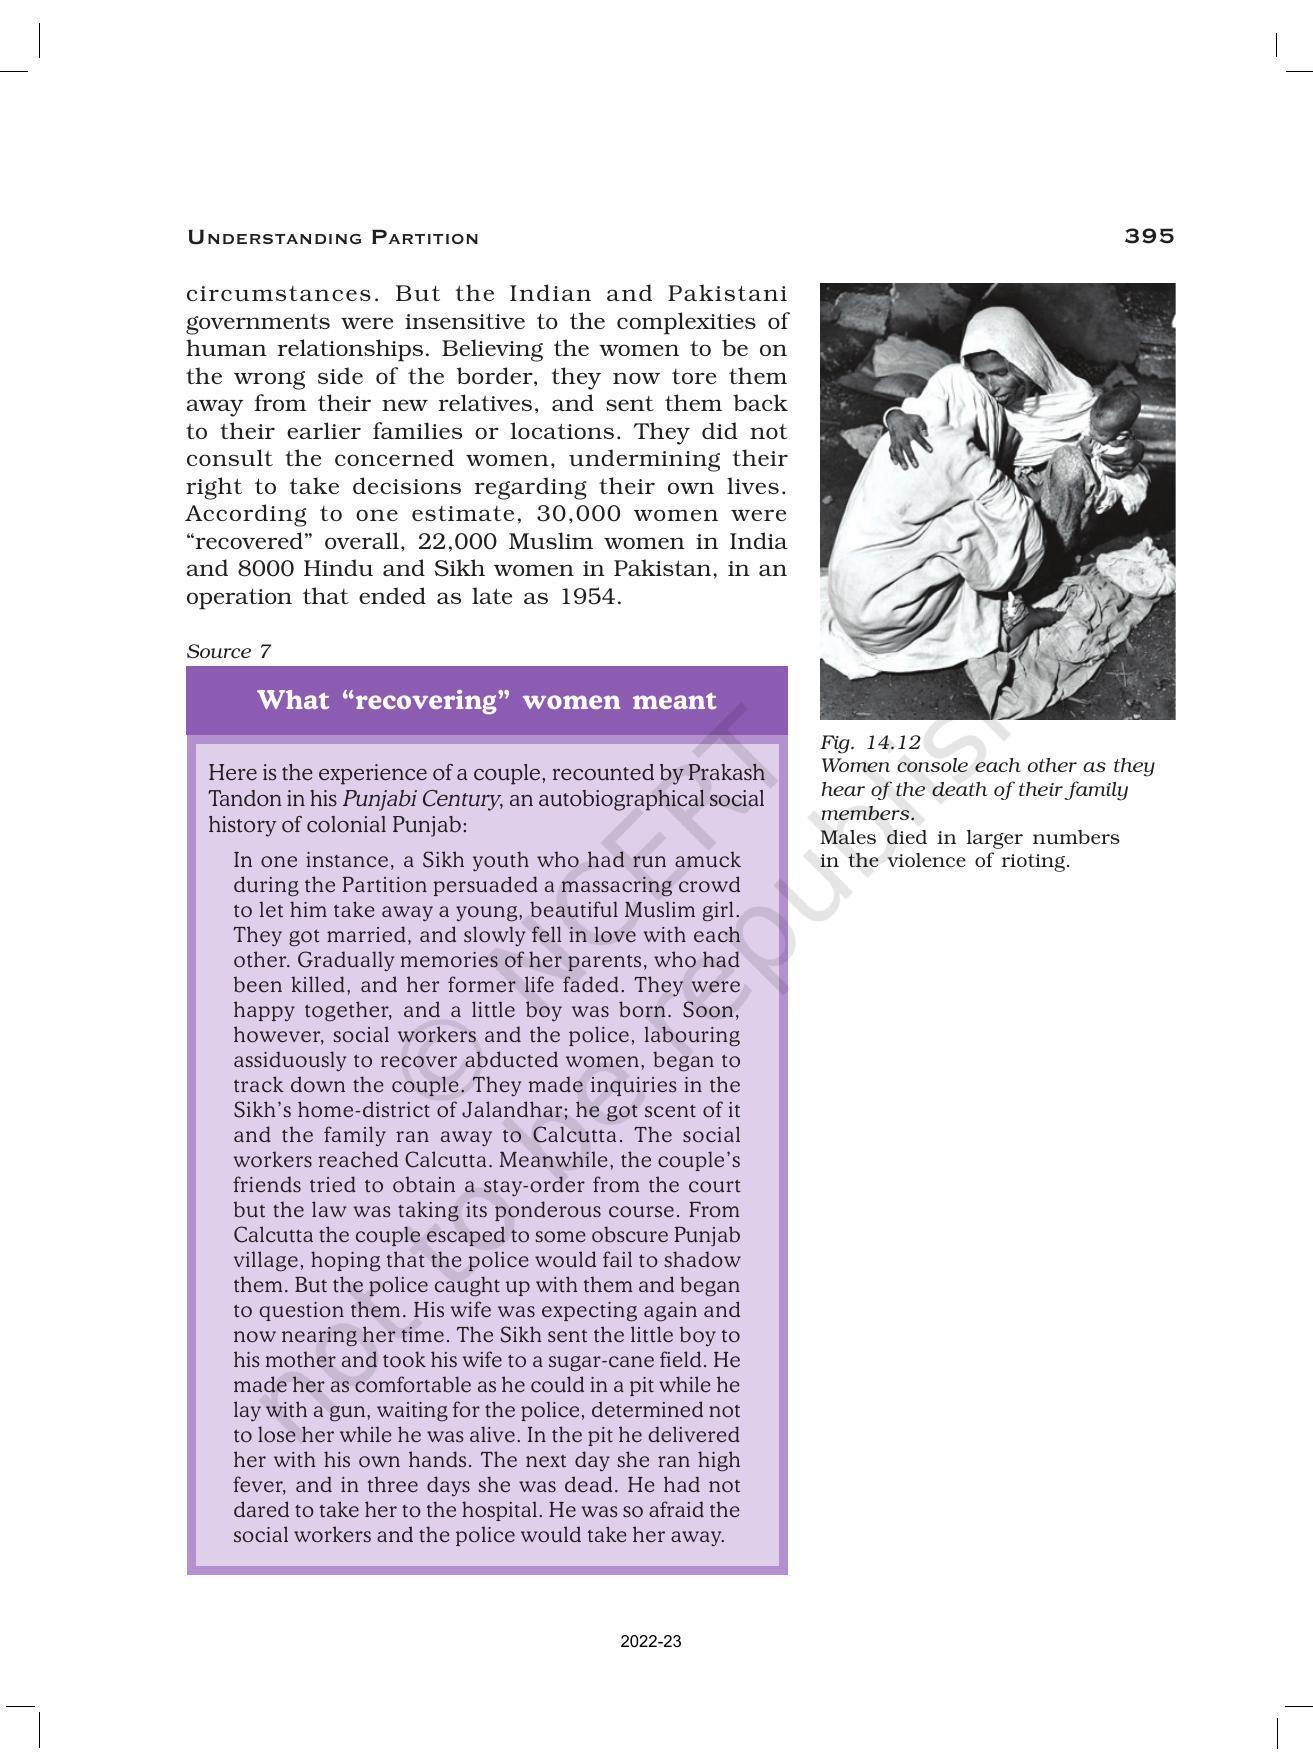 NCERT Book for Class 12 History (Part-III) Chapter 14 Understanding Partition - Page 20